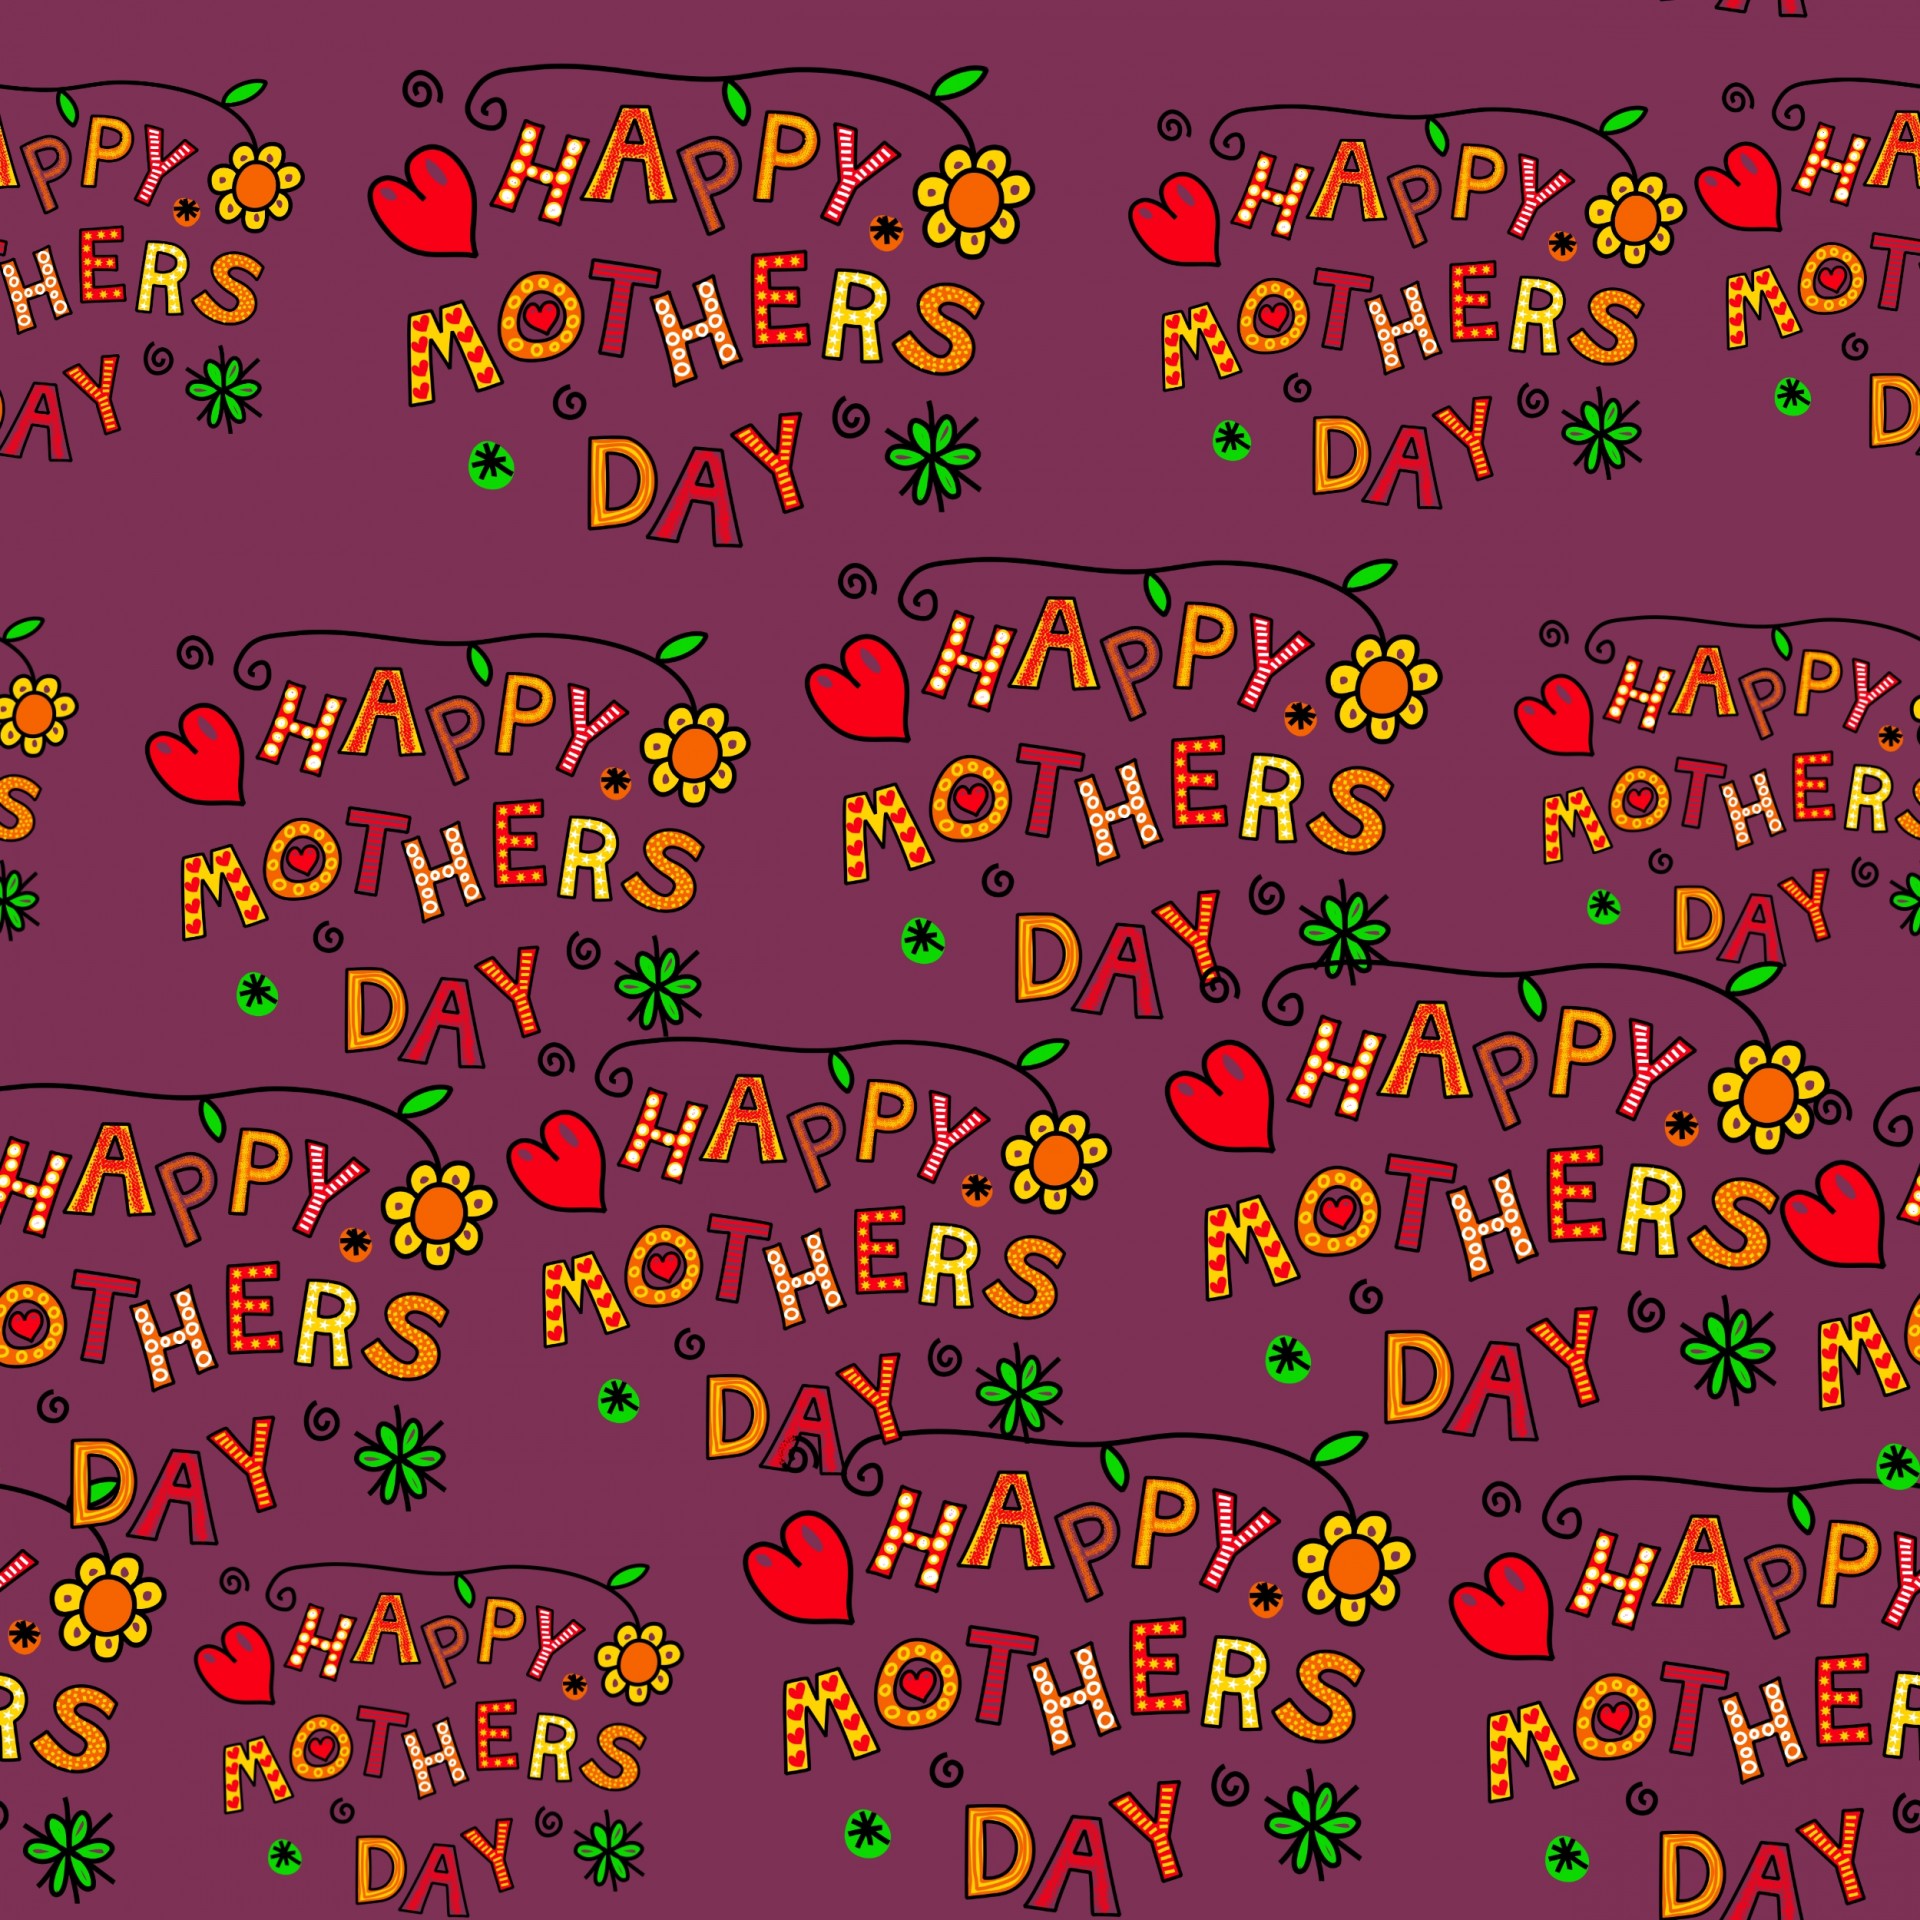 mothers-day-free-stock-photo-public-domain-pictures